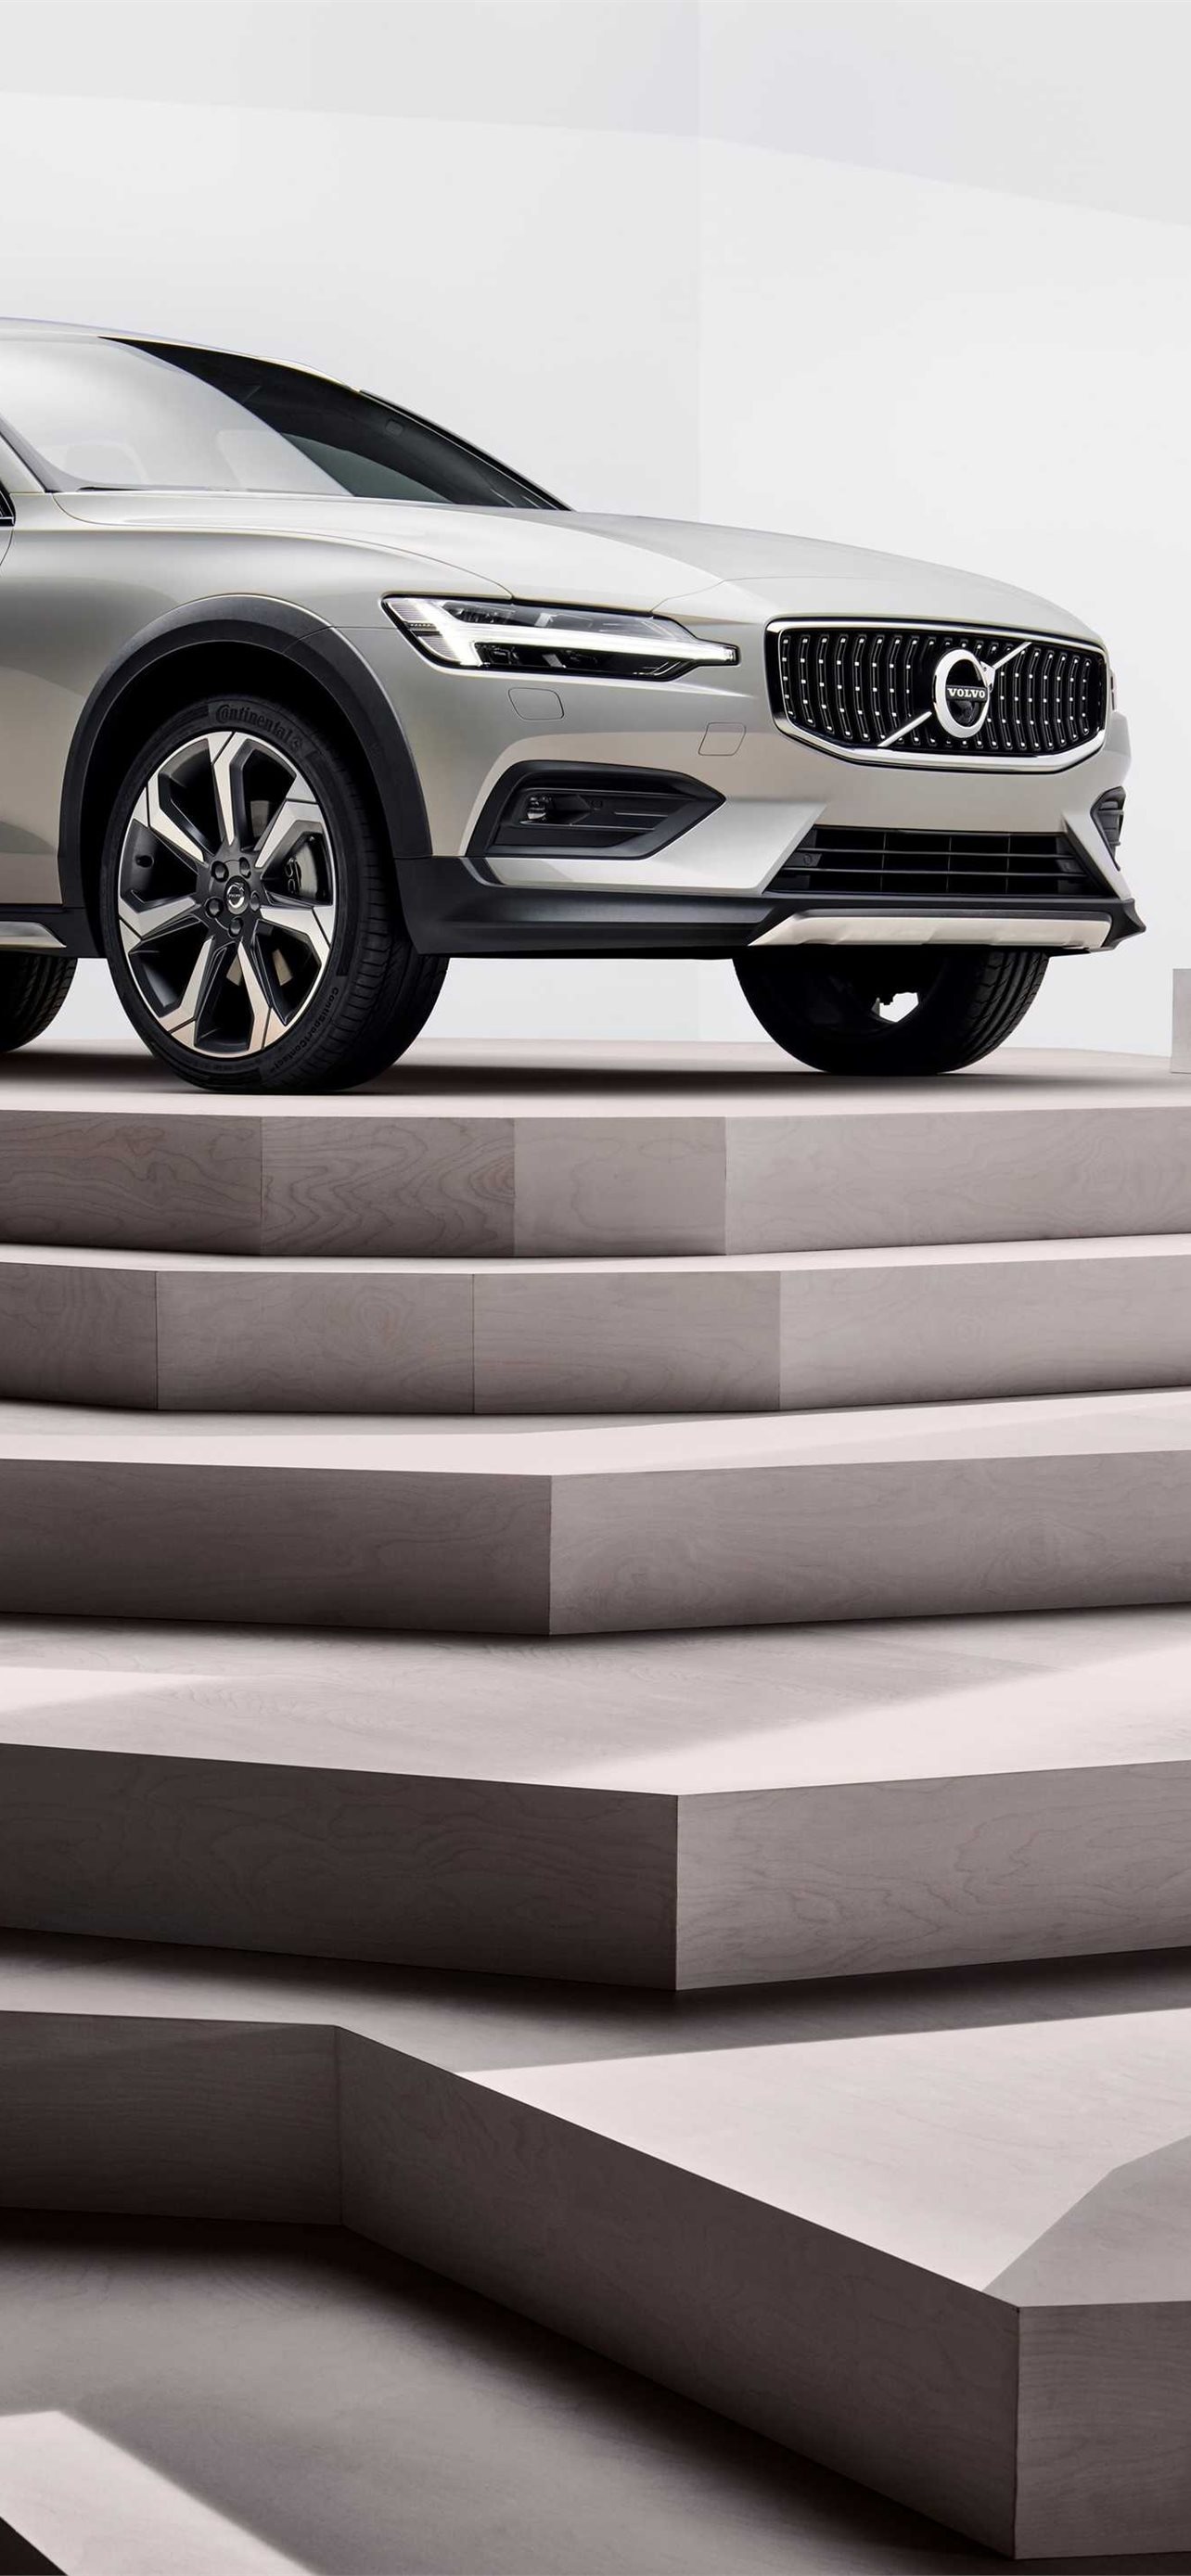 Volvo V60, Free iPhone wallpapers, Stunning design, High-quality images, 1290x2780 HD Handy